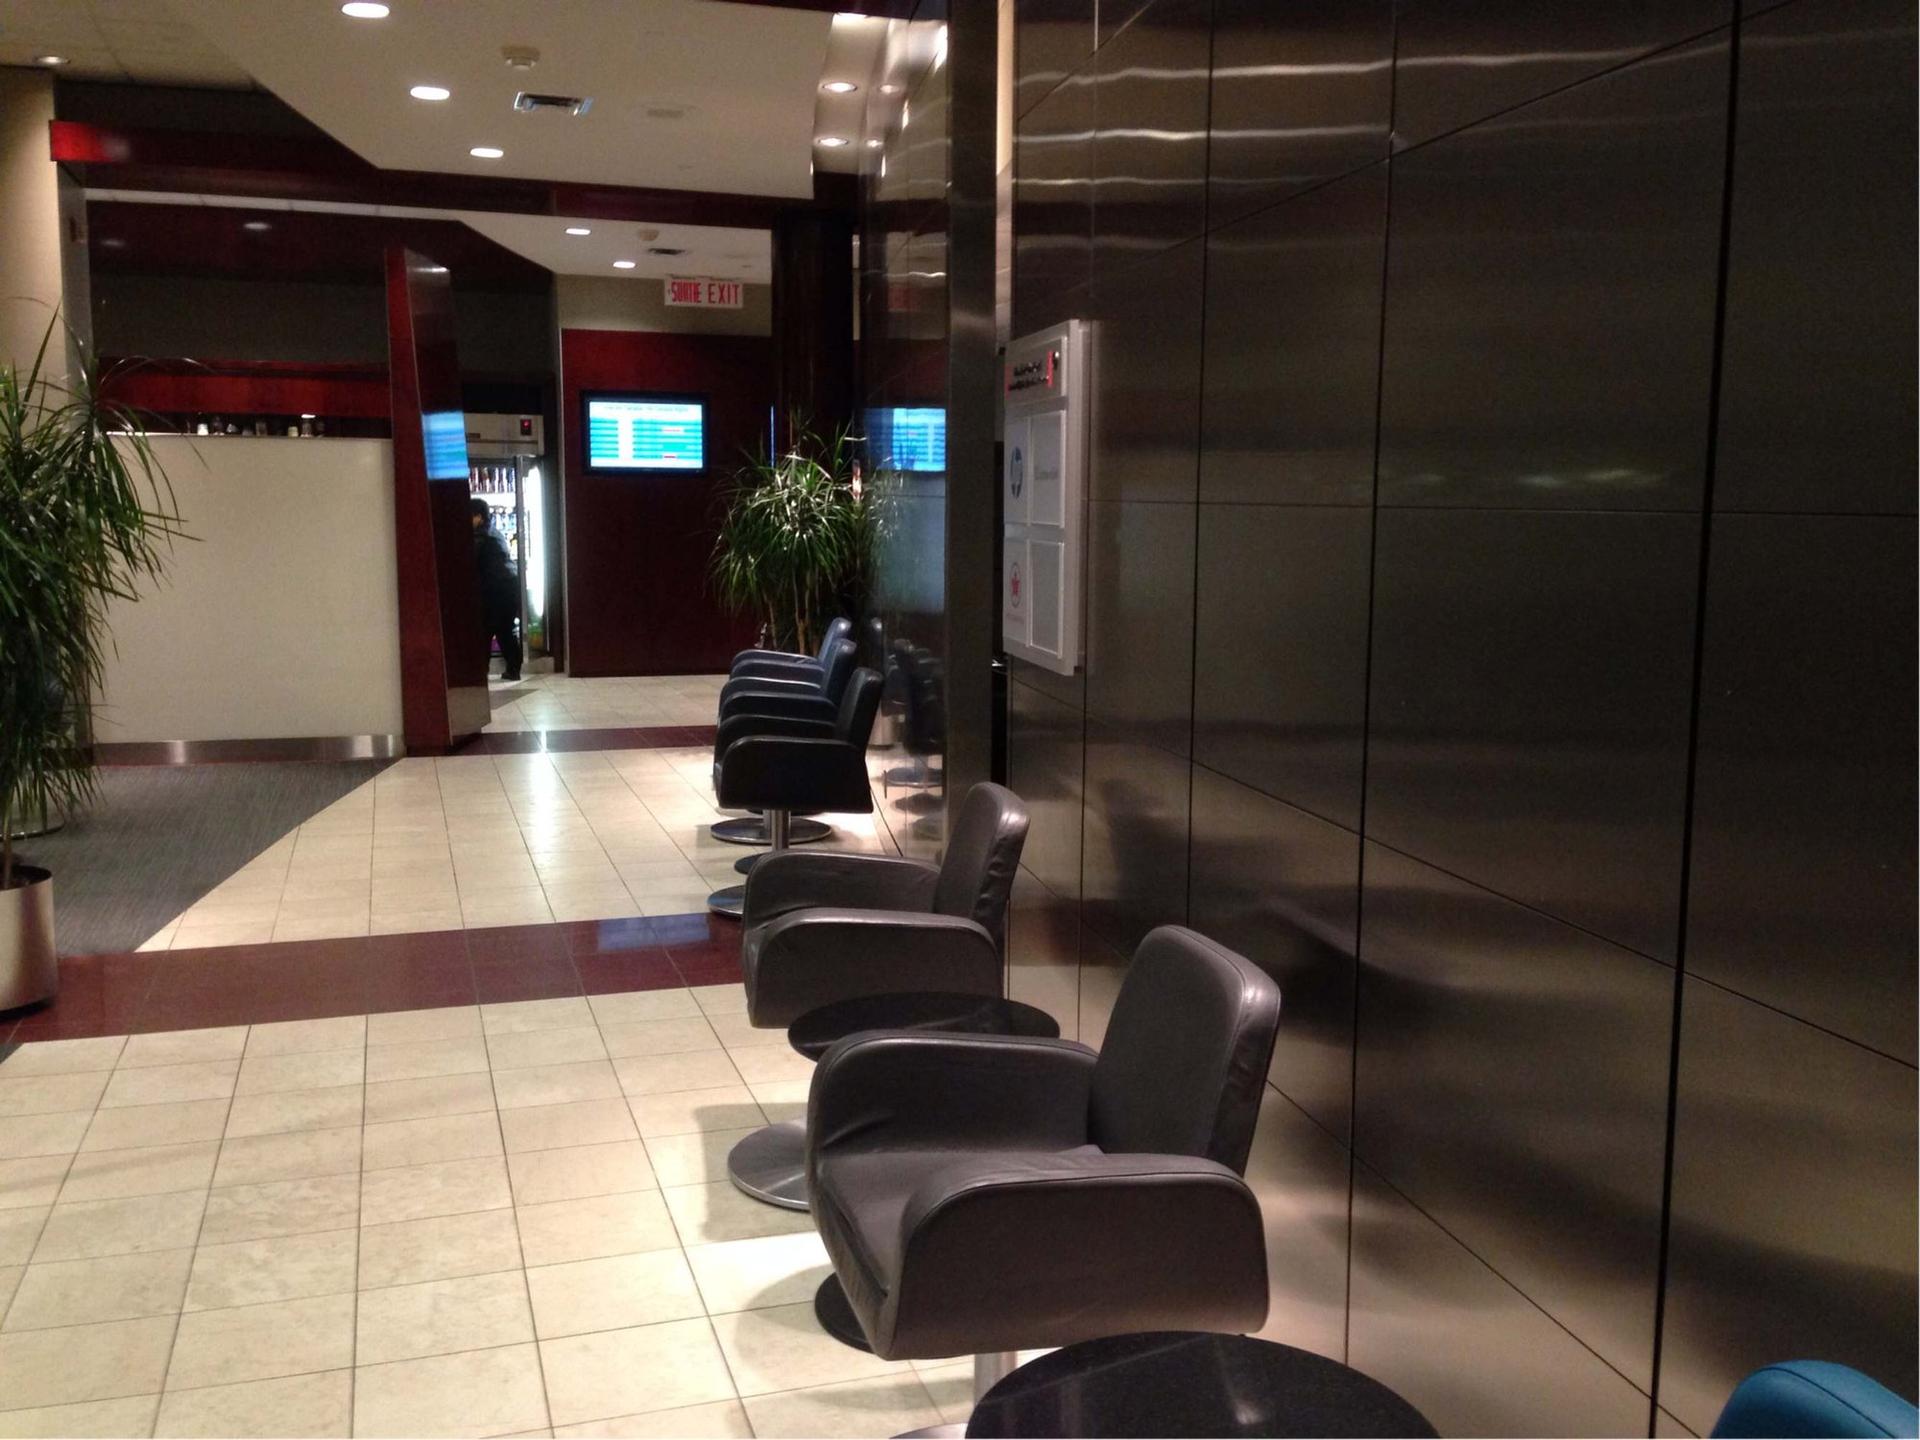 Air Canada Maple Leaf Lounge image 7 of 7